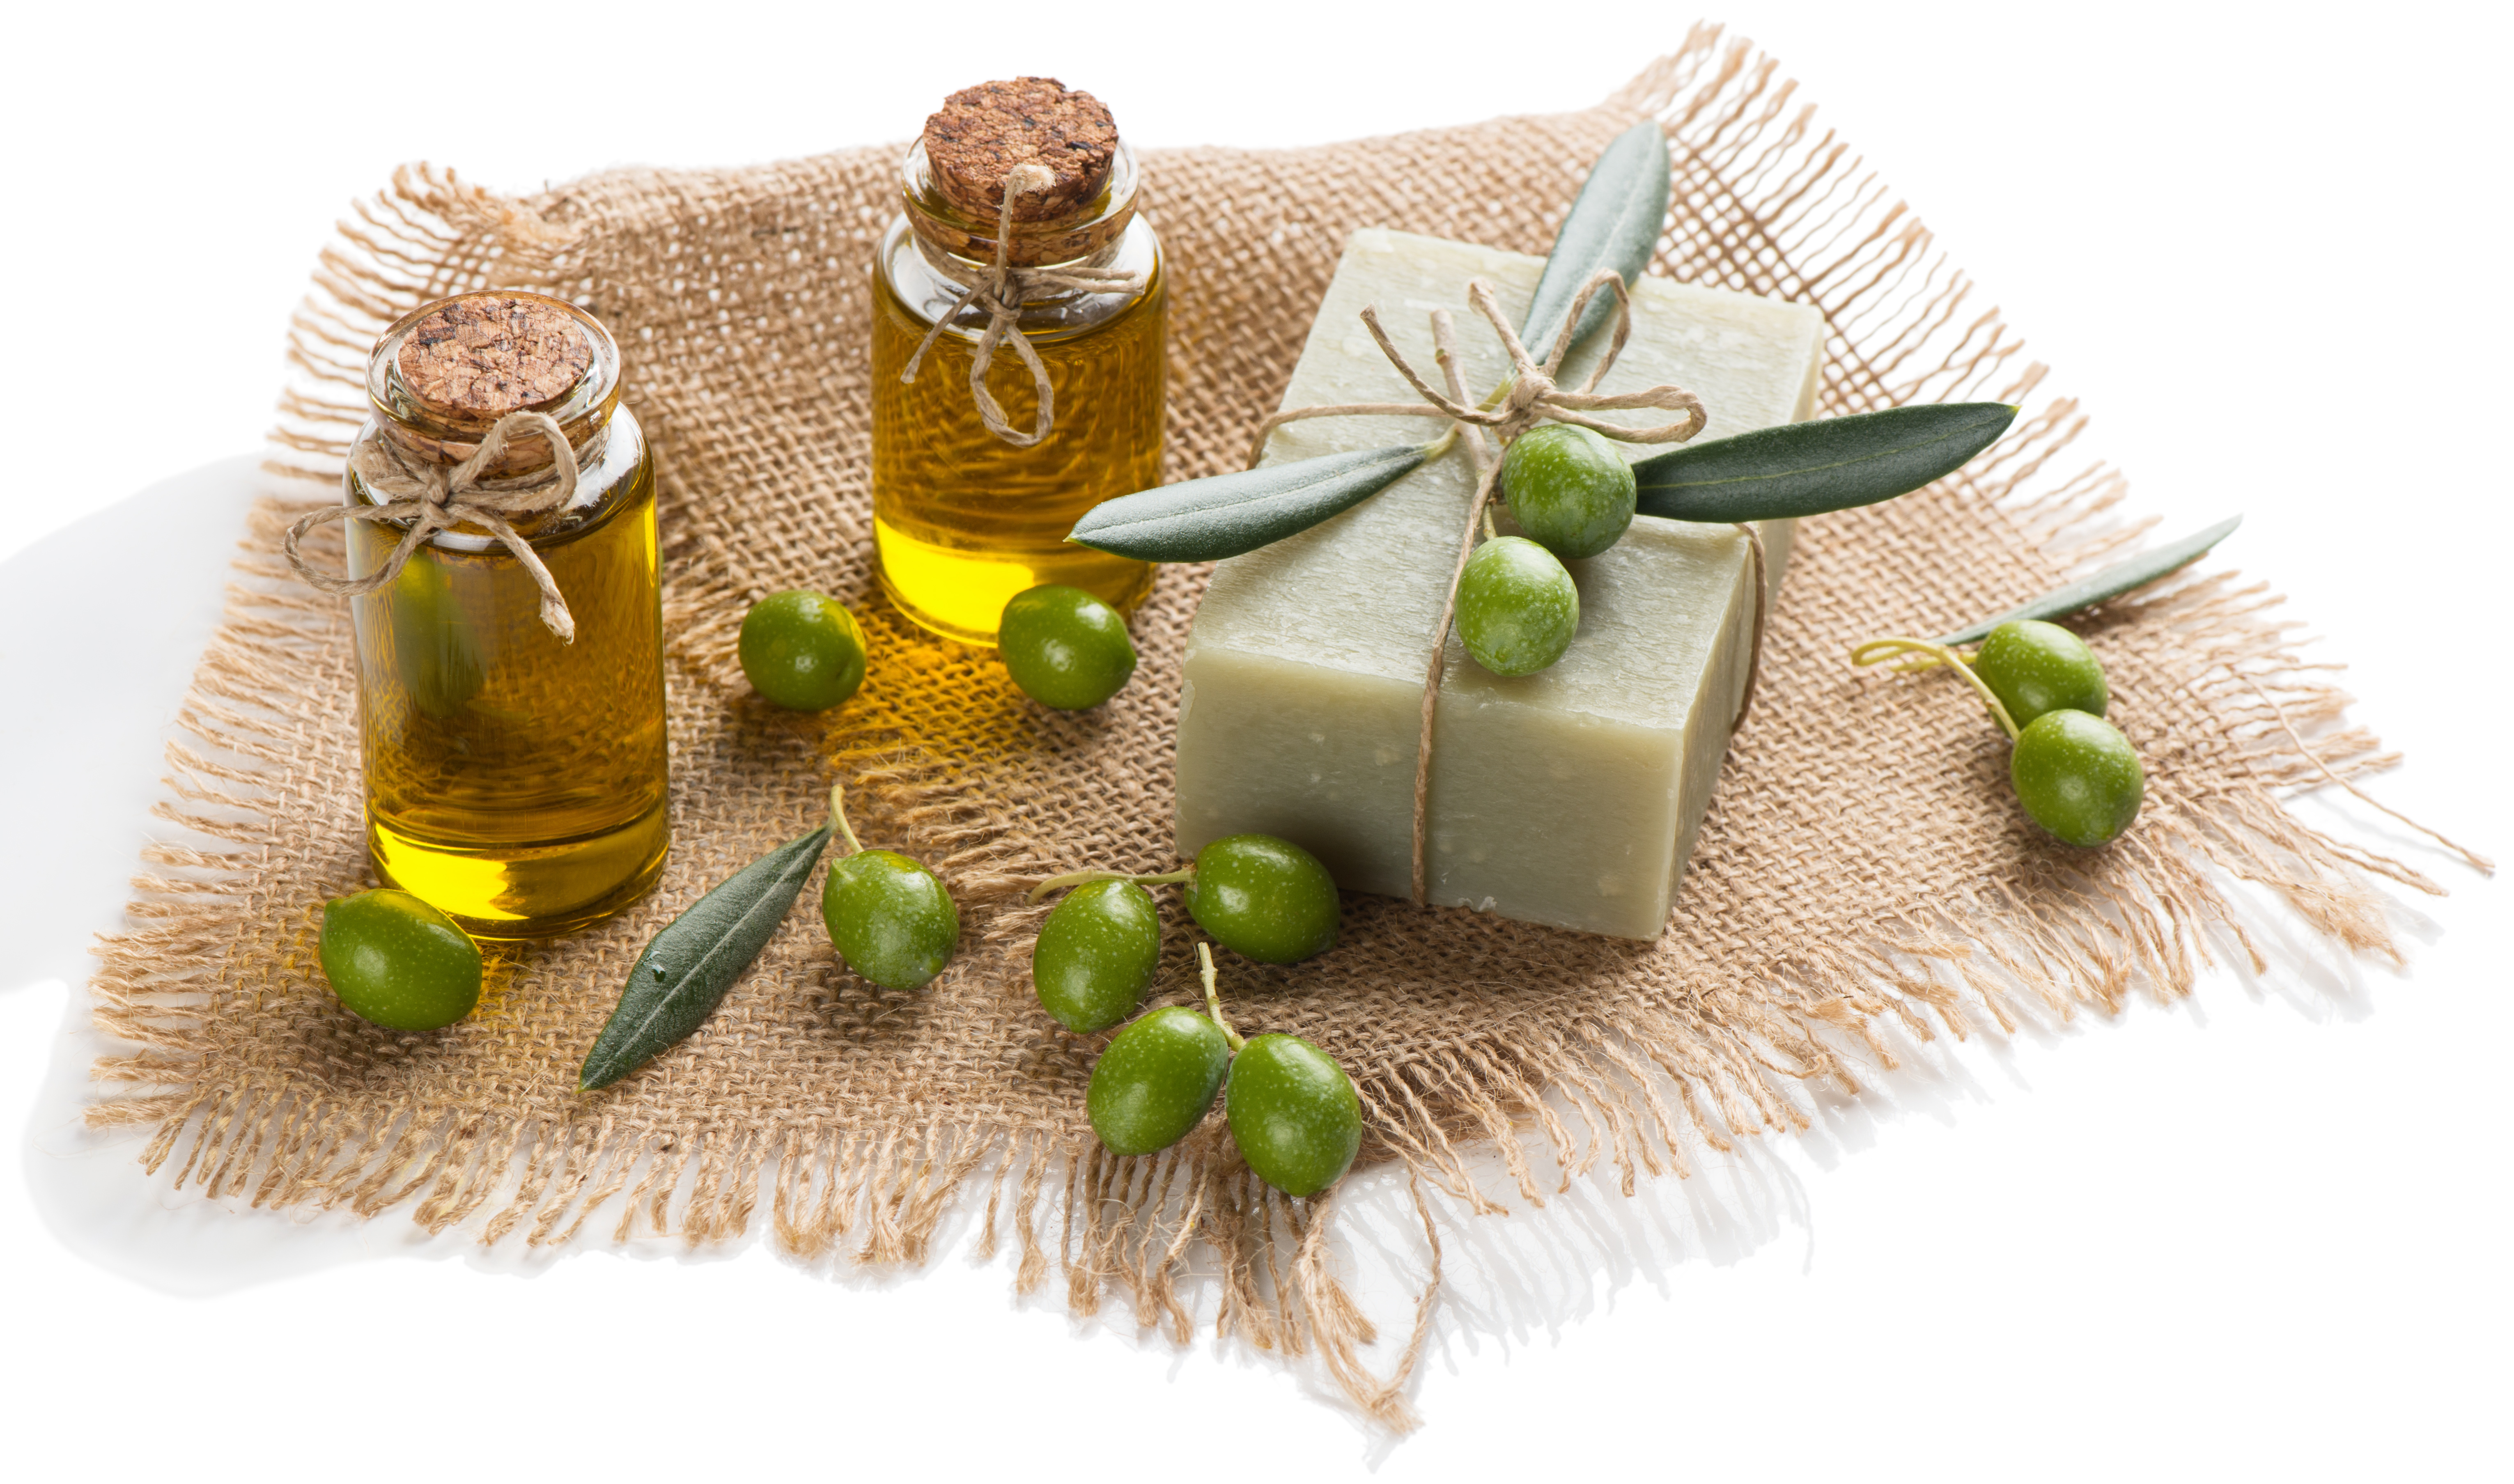 Tips to Avoid Olive Oil Fraud in Soapmaking